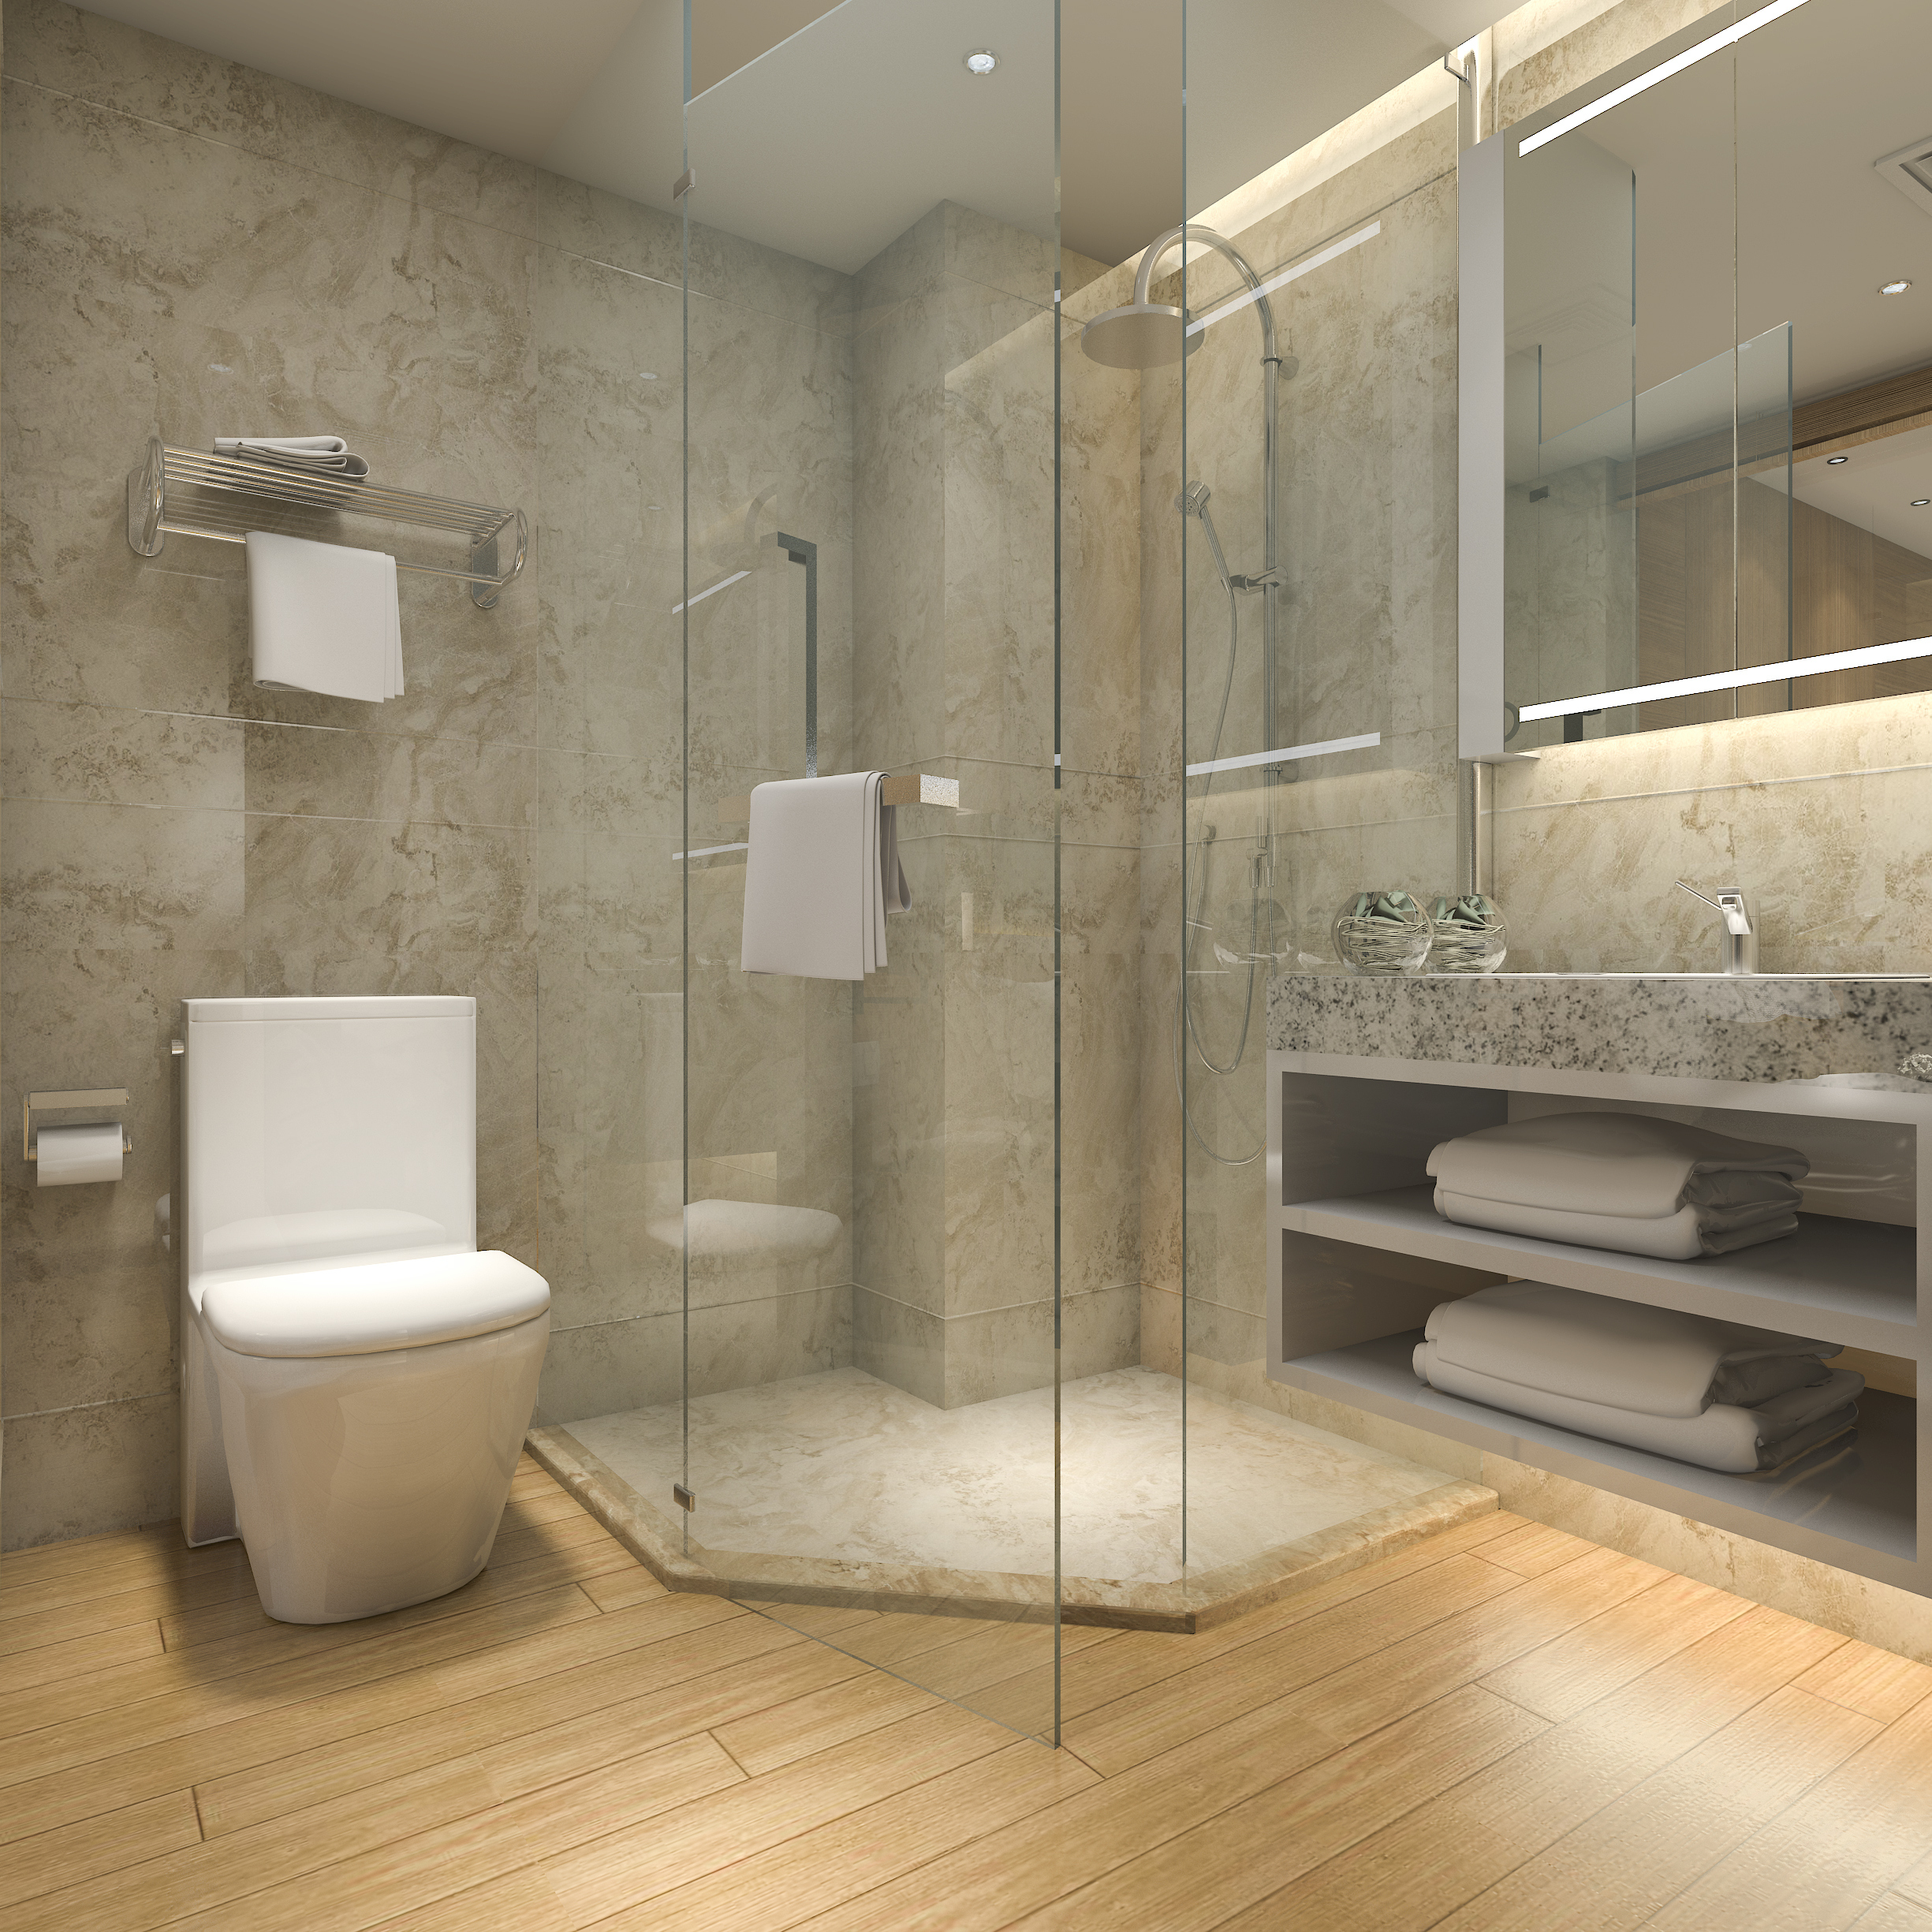 Elevate your primary bathroom with frameless glass shower installations for a modern, spacious ambiance.